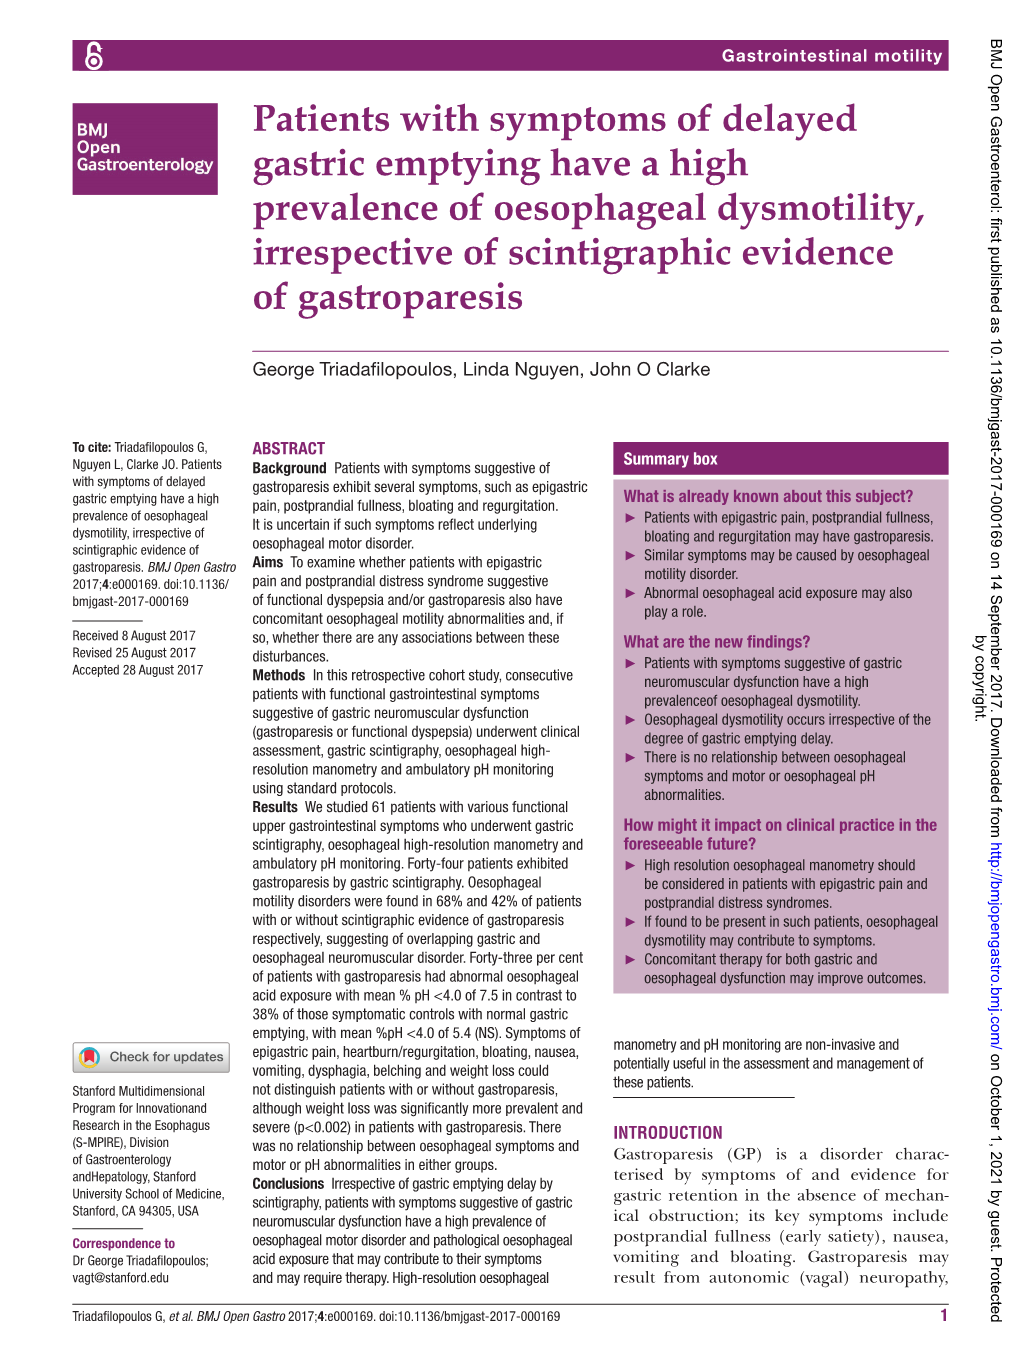 Patients with Symptoms of Delayed Gastric Emptying Have a High Prevalence of Oesophageal Dysmotility, Irrespective of Scintigraphic Evidence of Gastroparesis